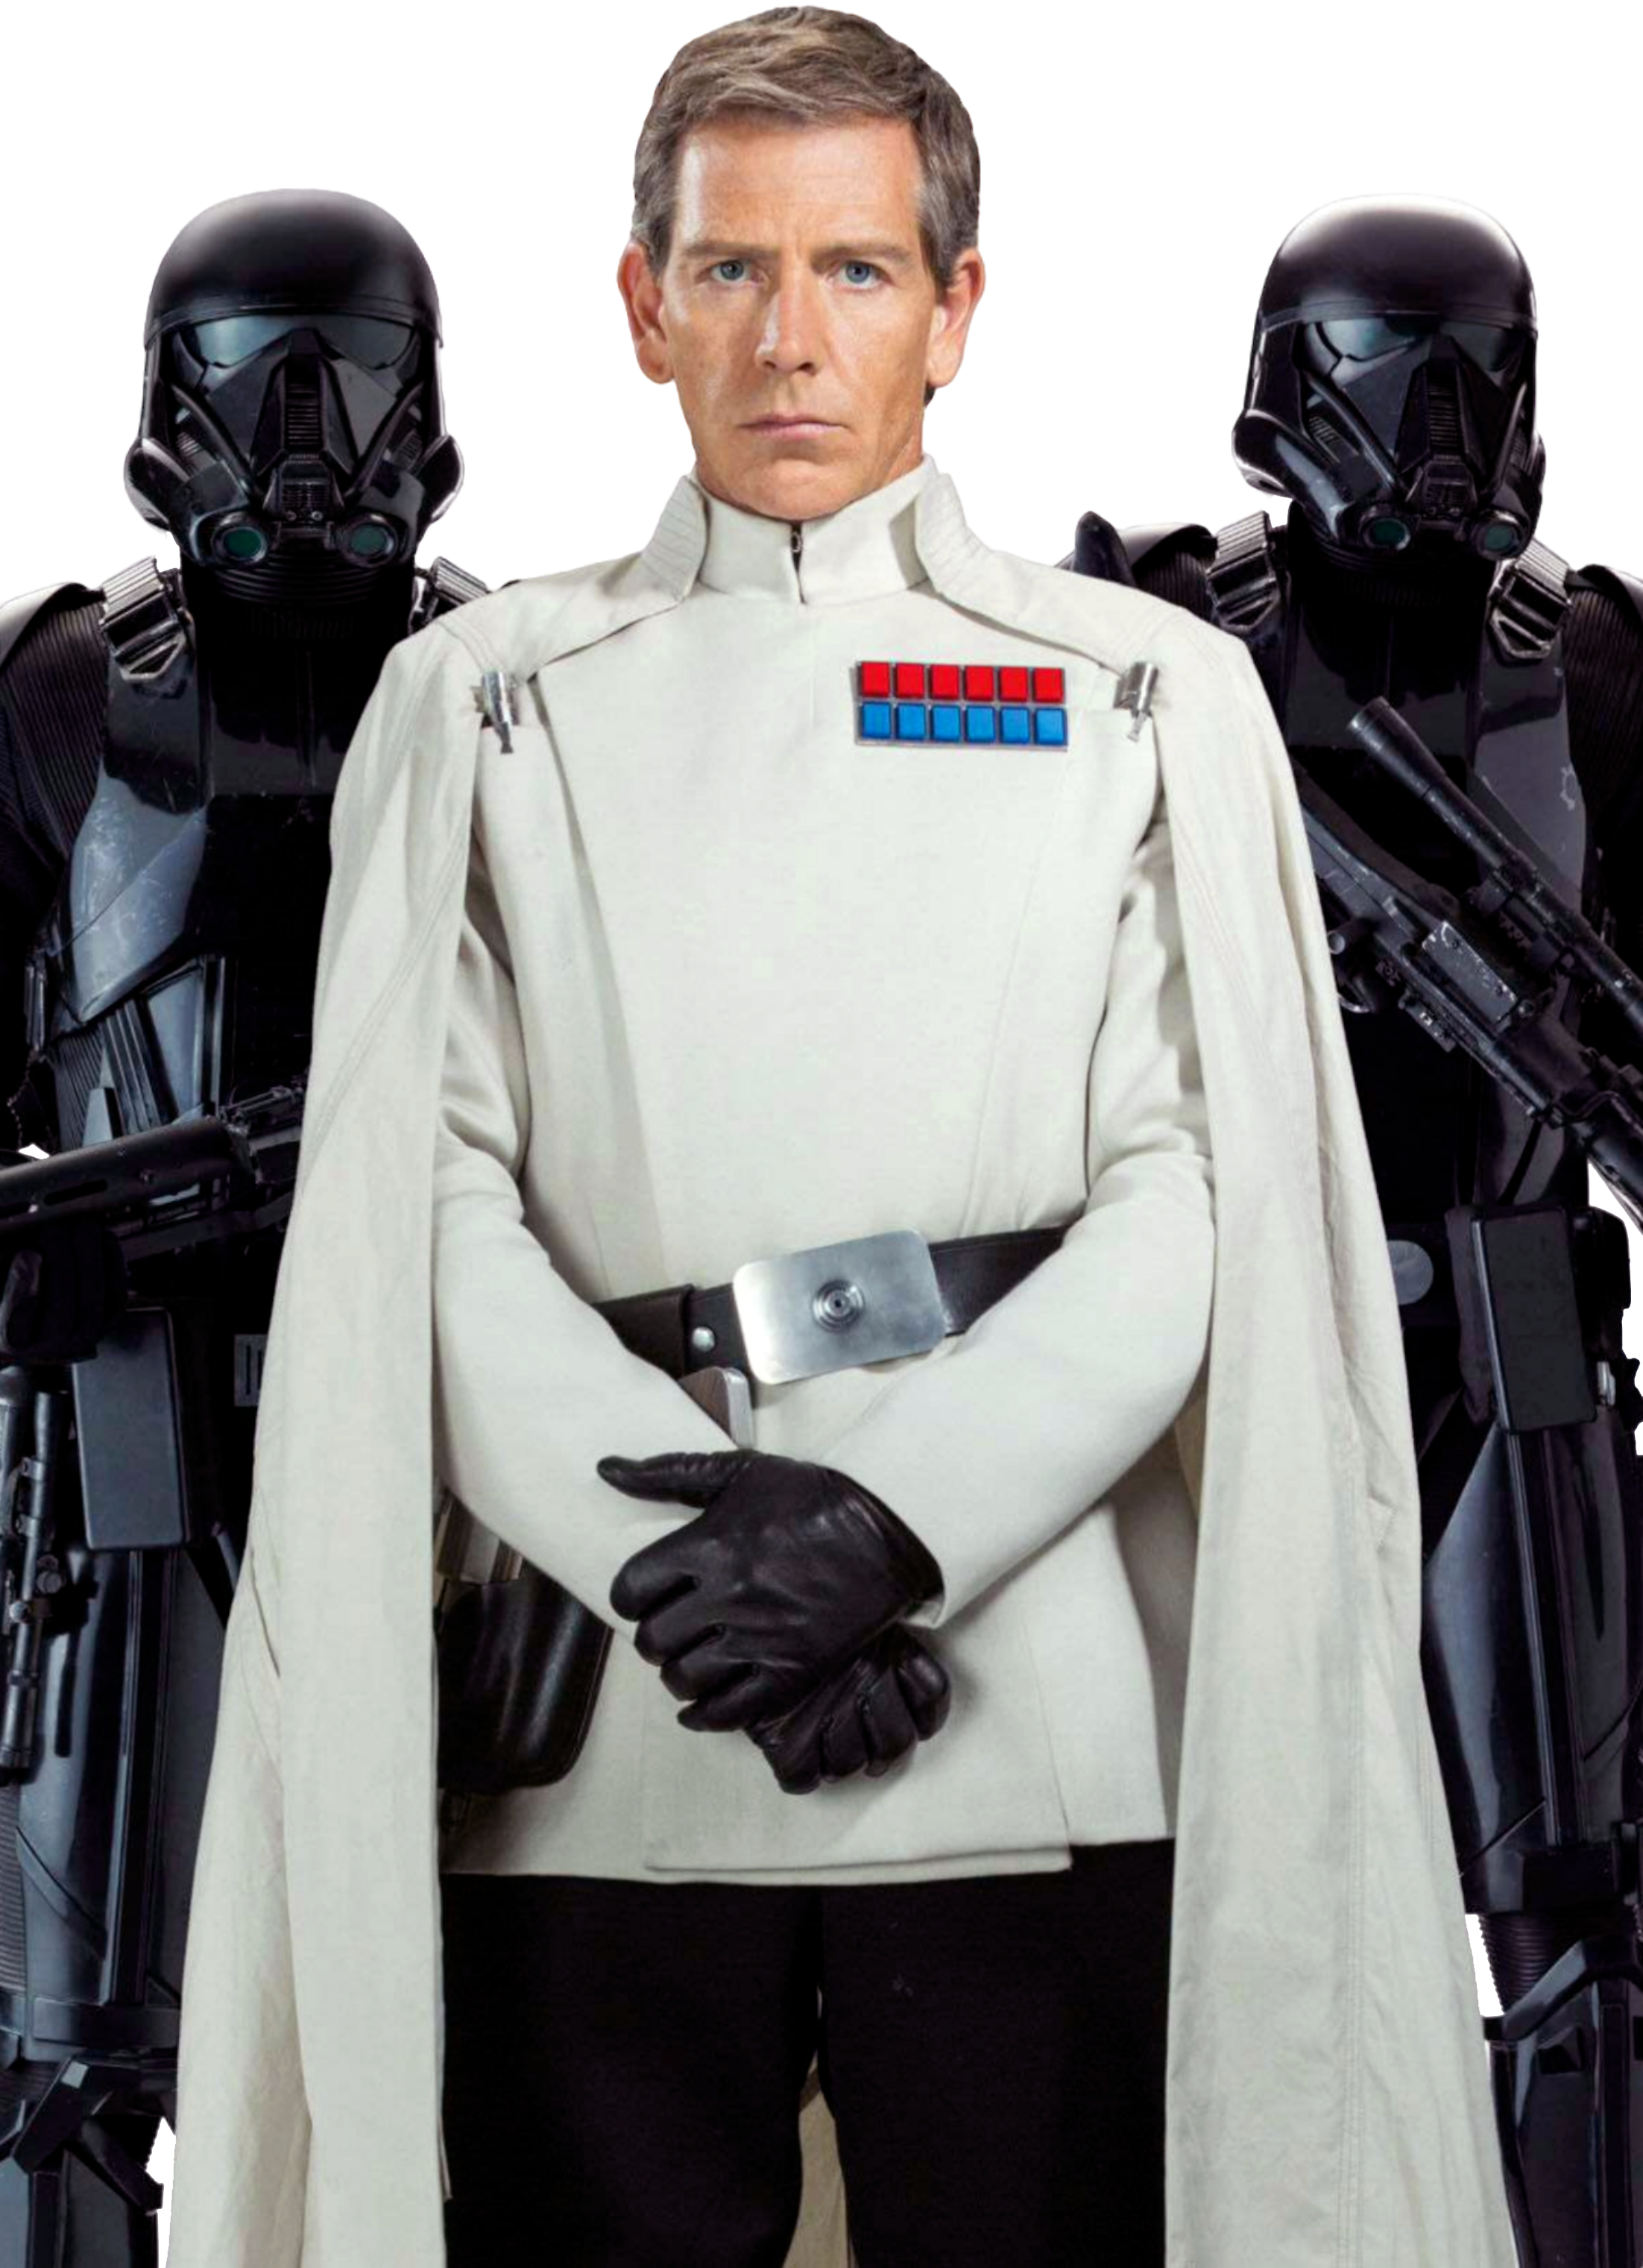 Star Wars Rogue One Director Orson Krennic Erso Death Troopers Scariff Jedha RO 